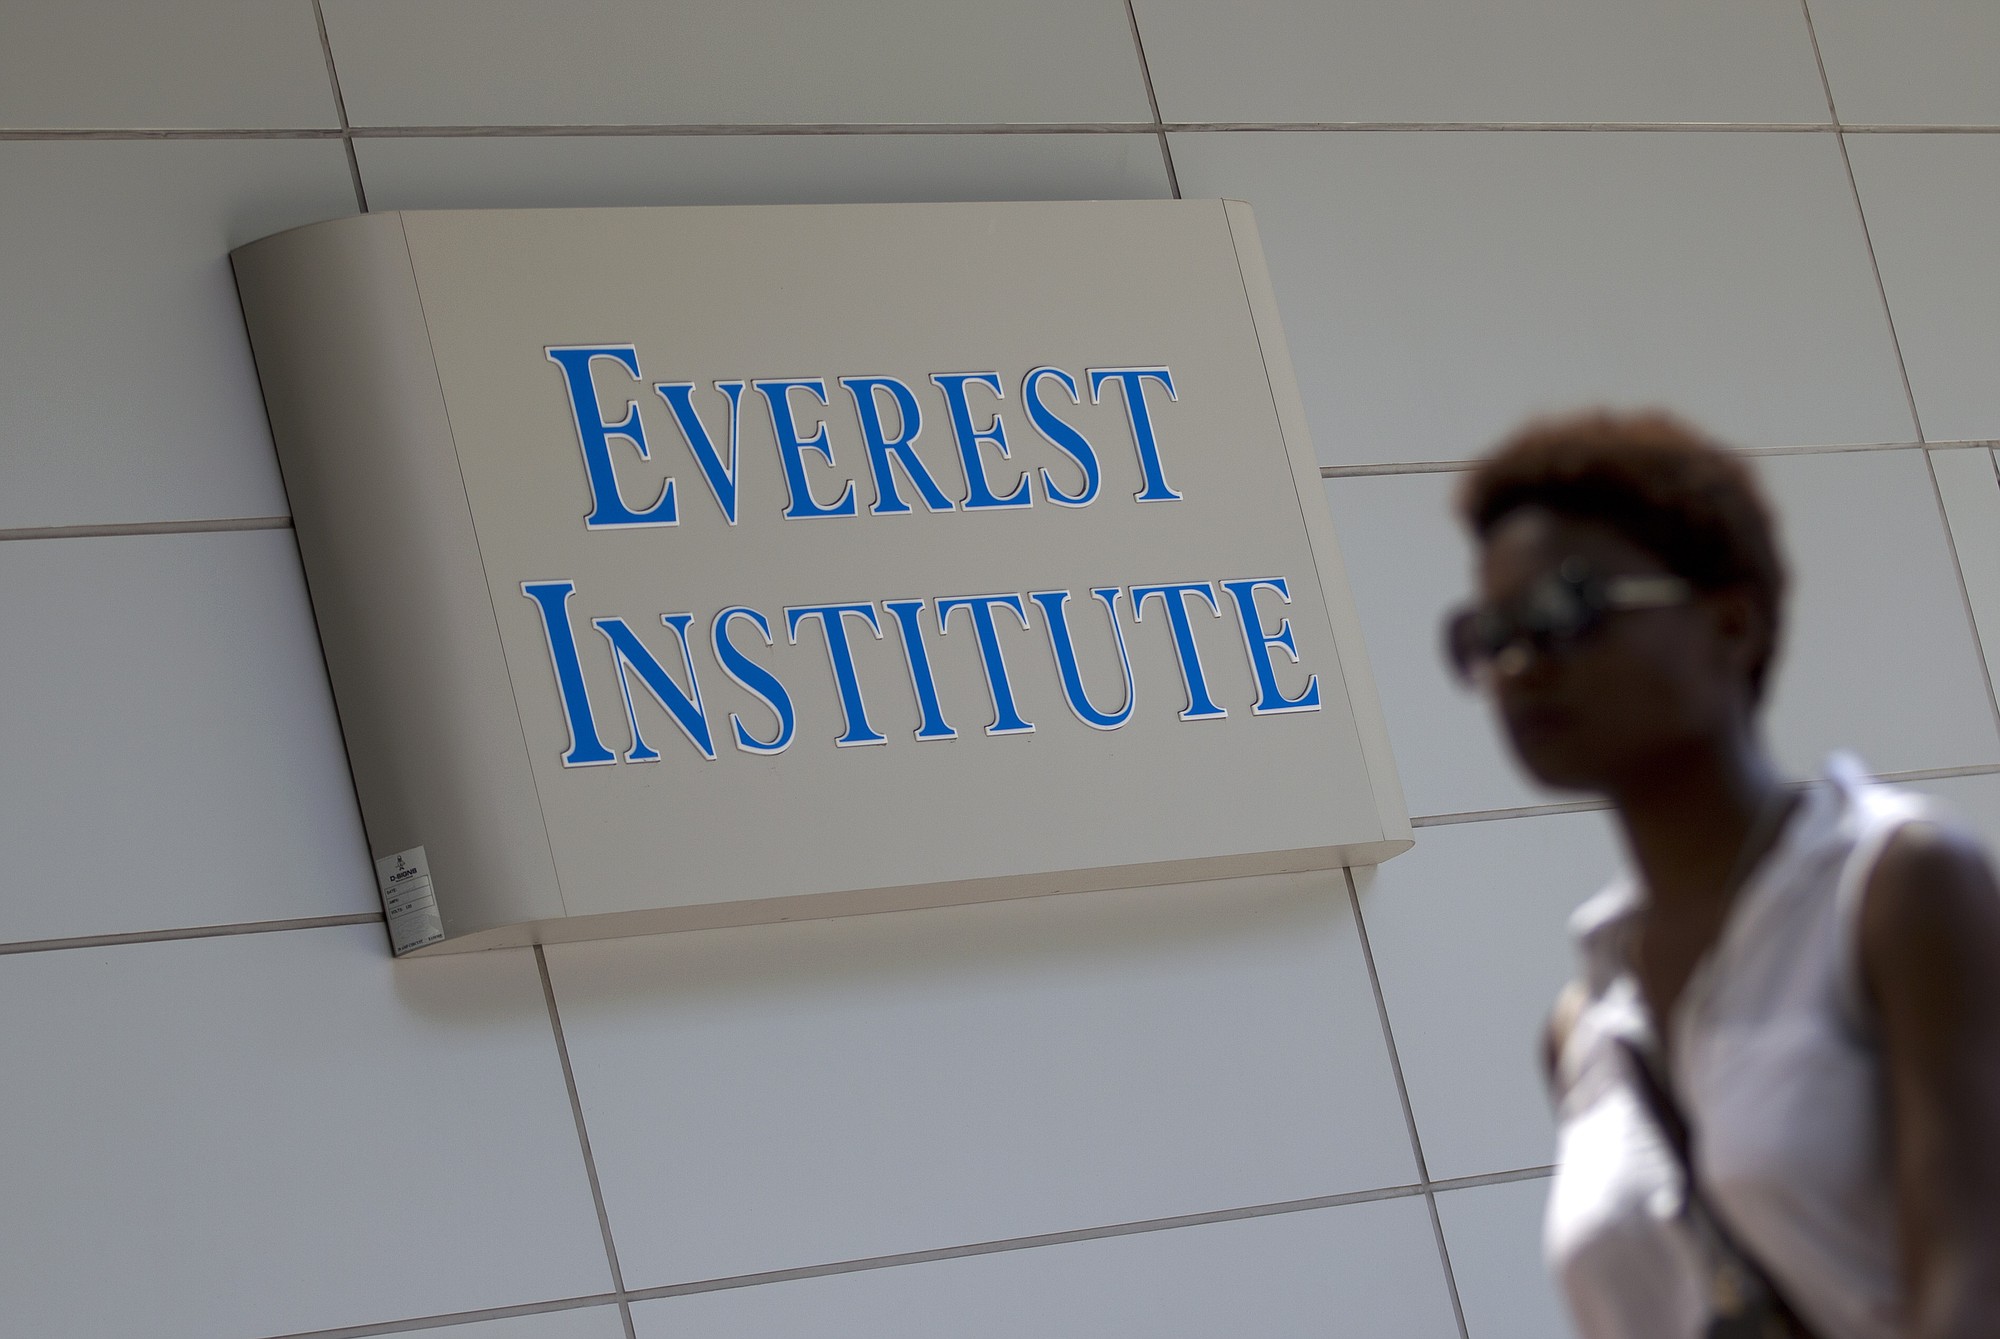 A person walks past an Everest Institute sign on an office building in Silver Spring, Md..